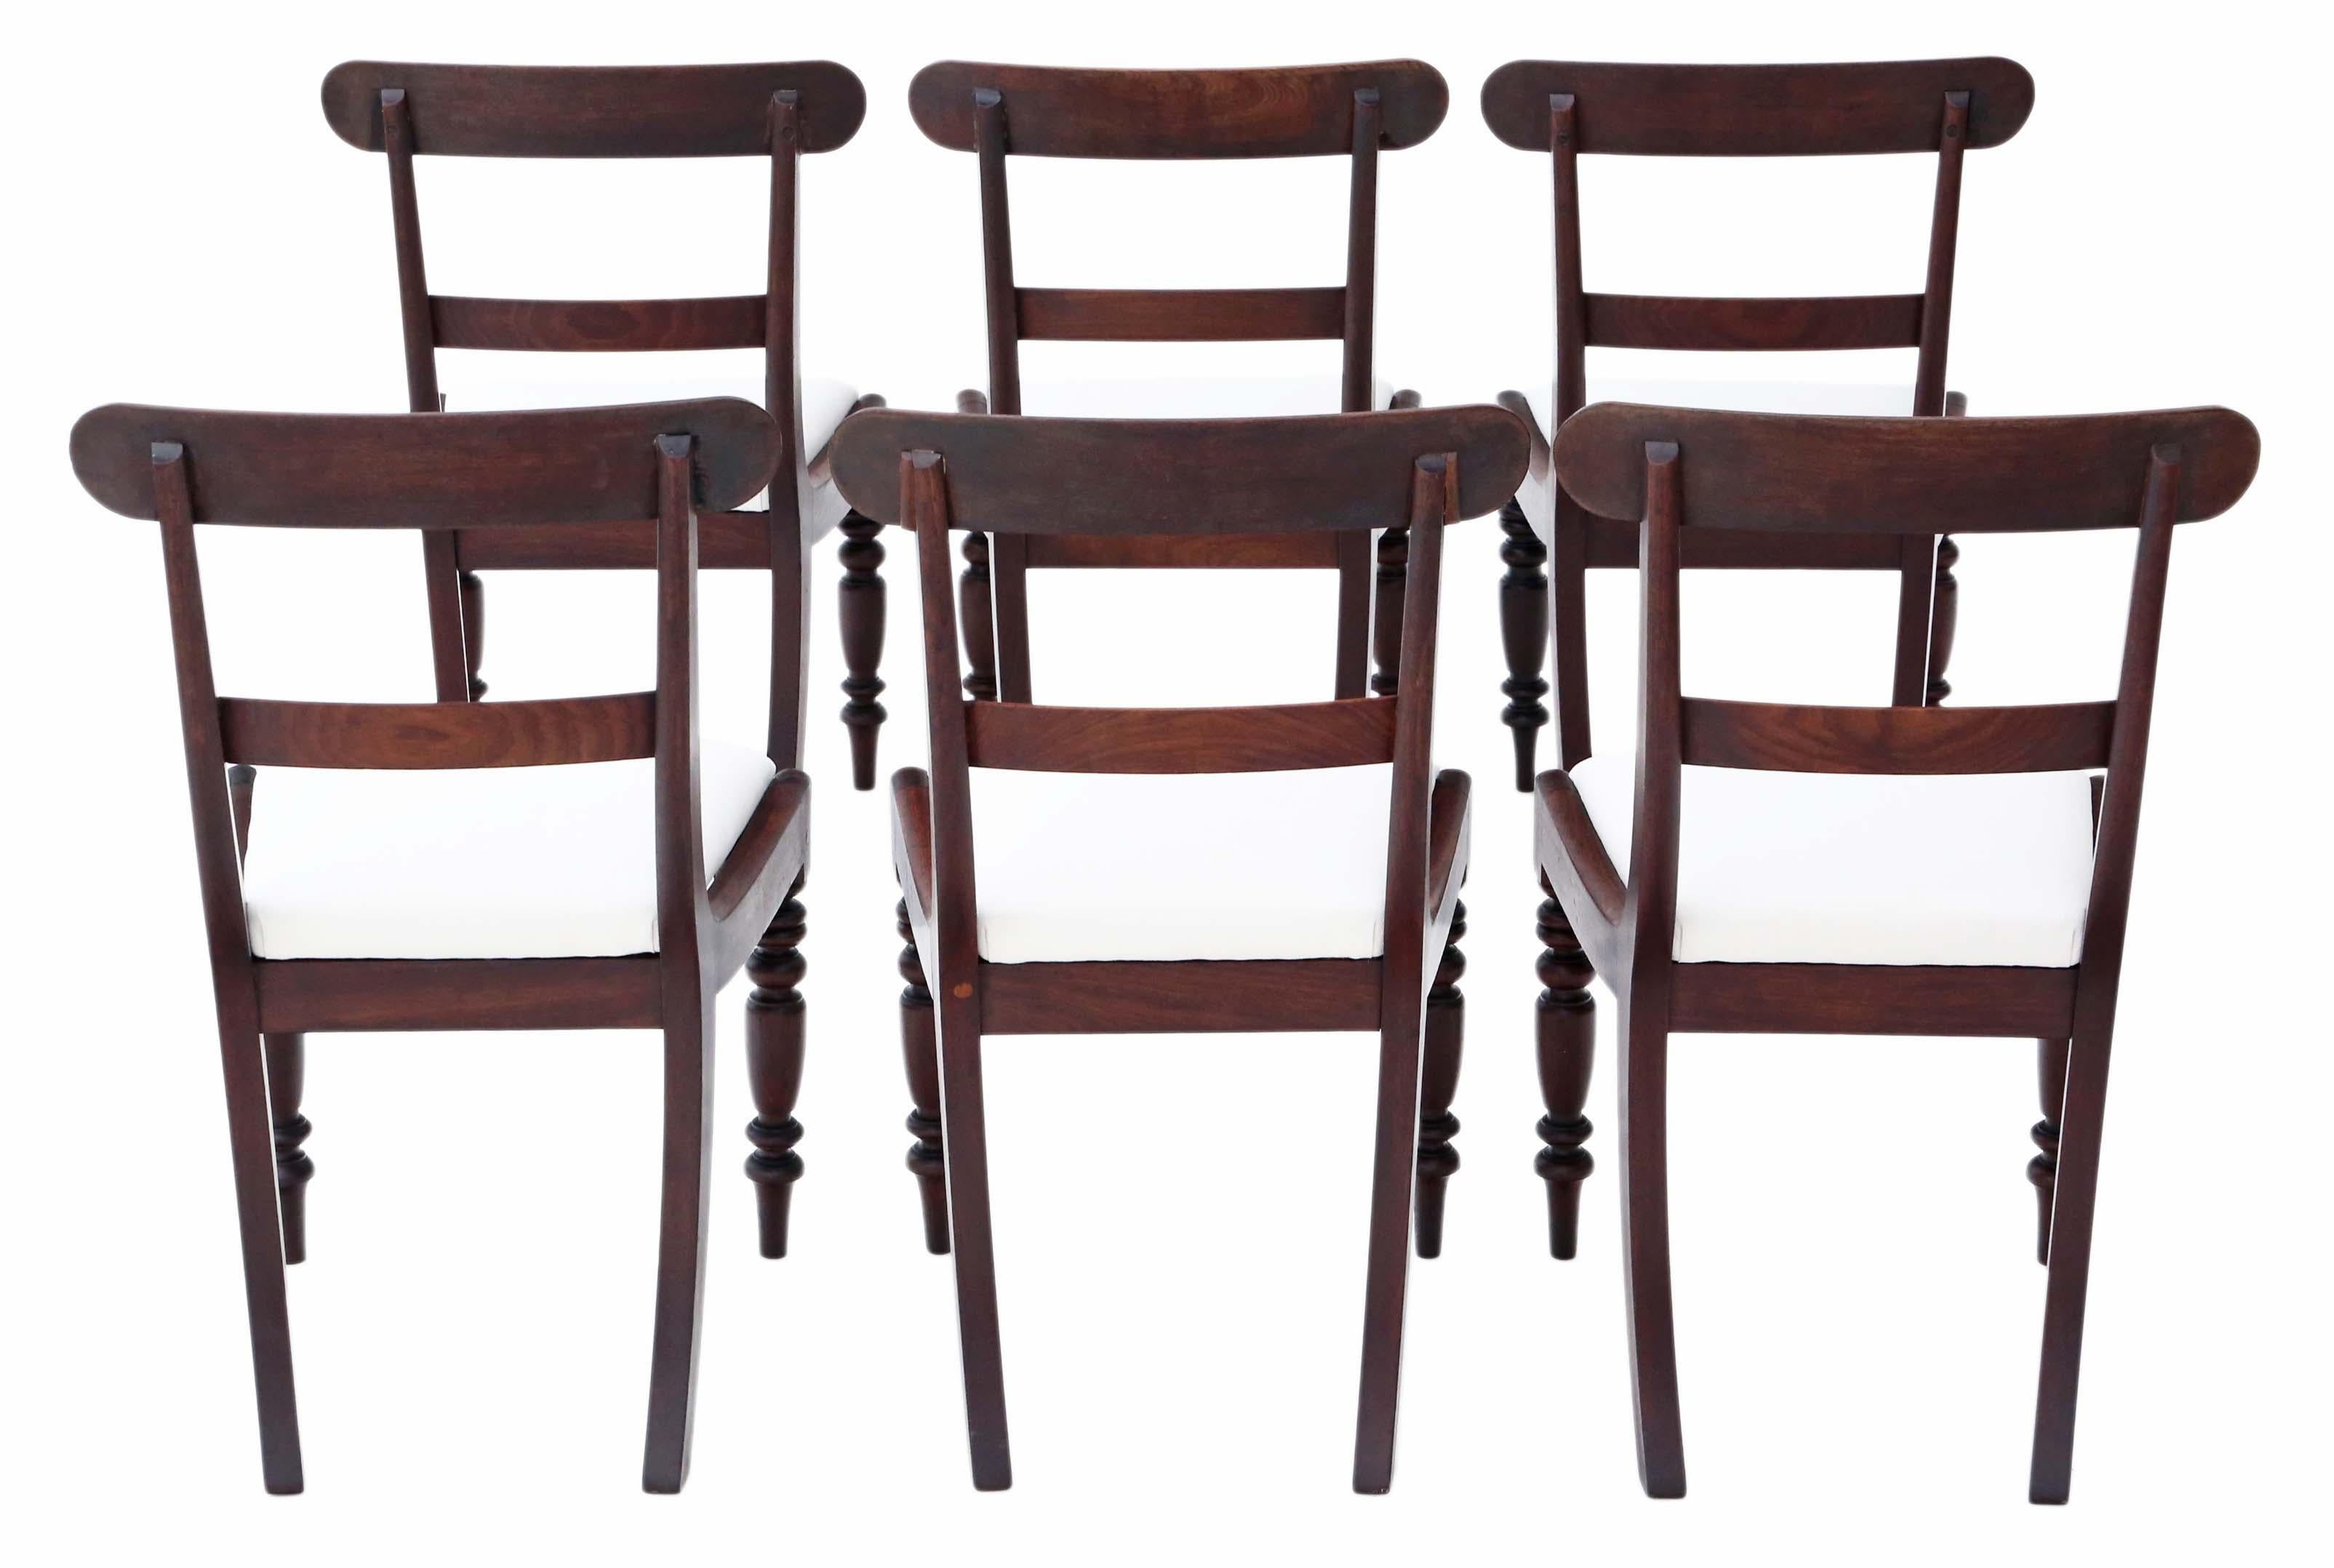 Antique fine quality set of 6 Victorian mahogany dining chairs, circa 1850.
No loose joints and no woodworm.
New upholstery in a heavy weight fabric.
Overall maximum dimensions:
Measures: 50cmW x 50cmD x 86cmH (45cmH seat when sat on).
Good